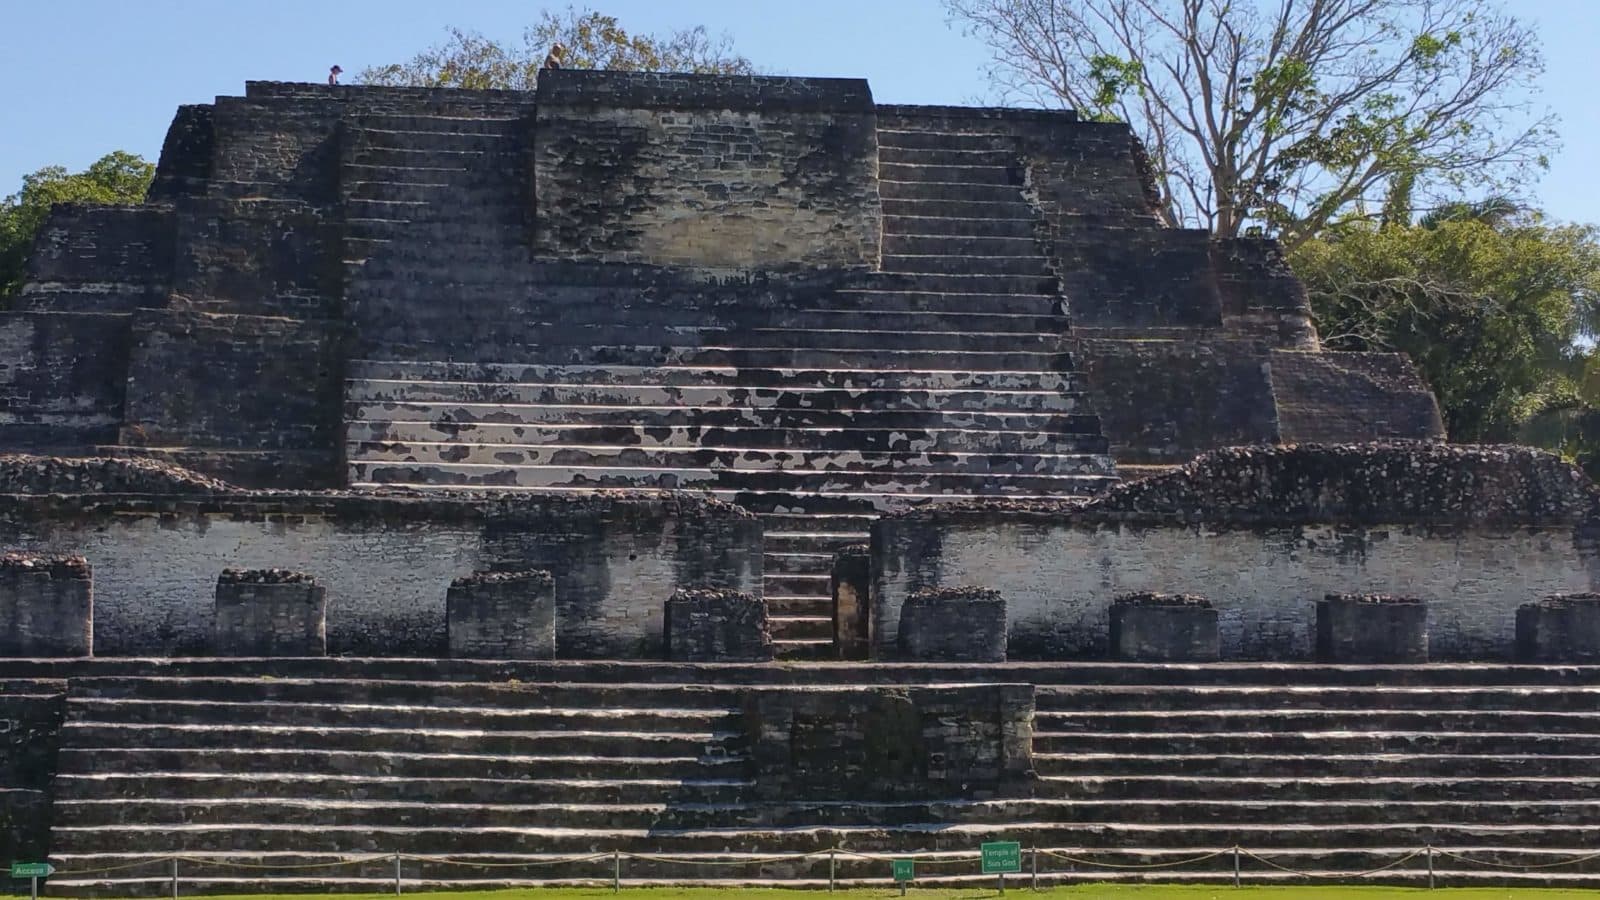 Gallivanting Souls family waves on top of Mayan structure at Altun Ha